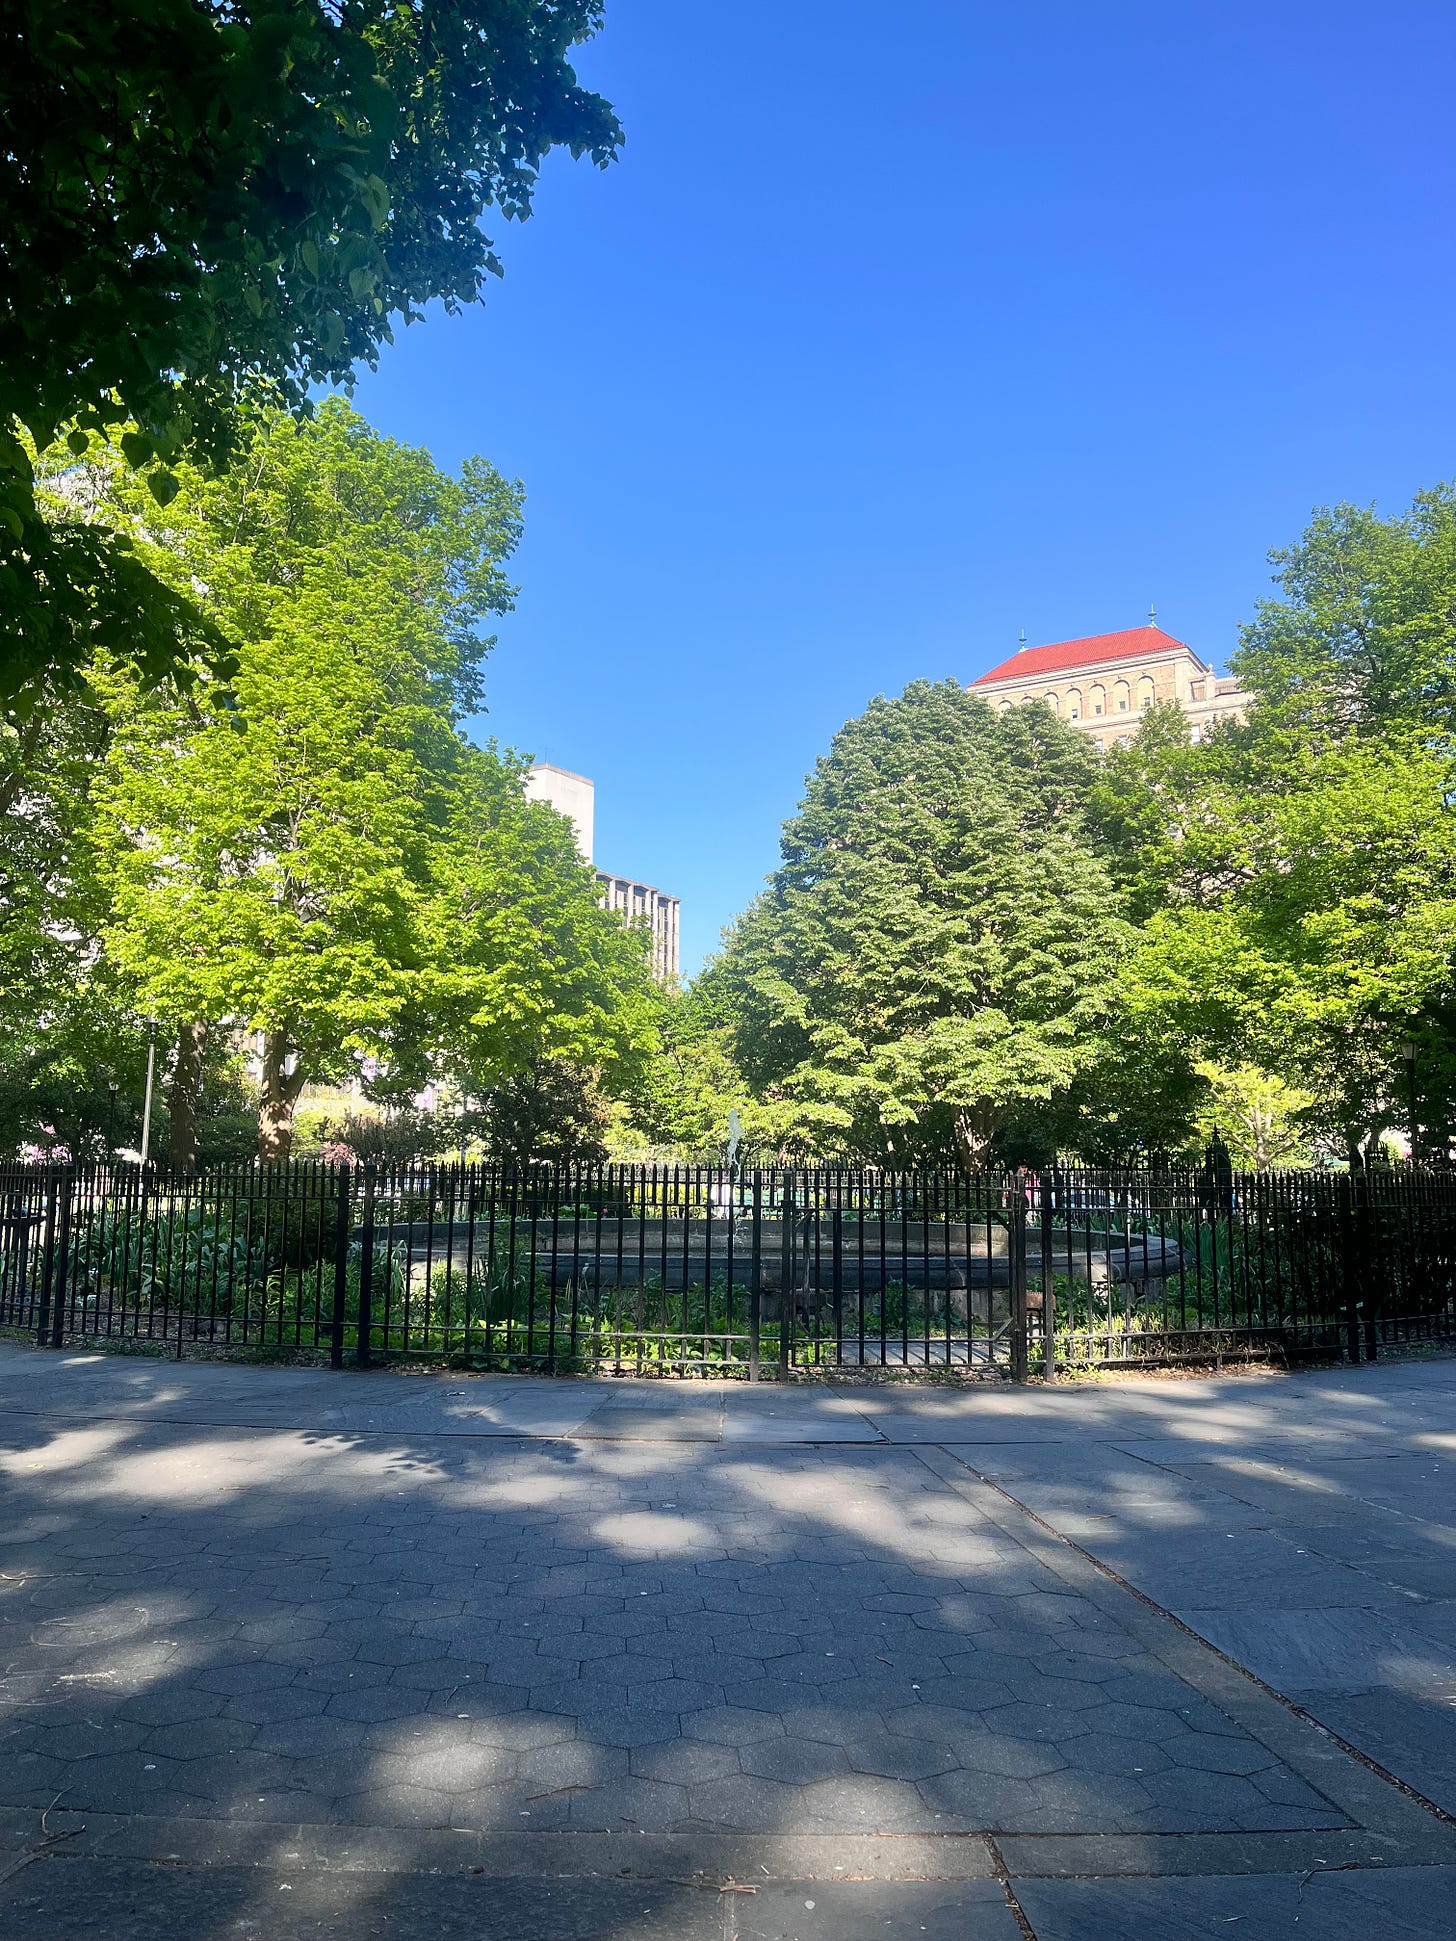 A beautiful day at Stuyvesant Park in New York City